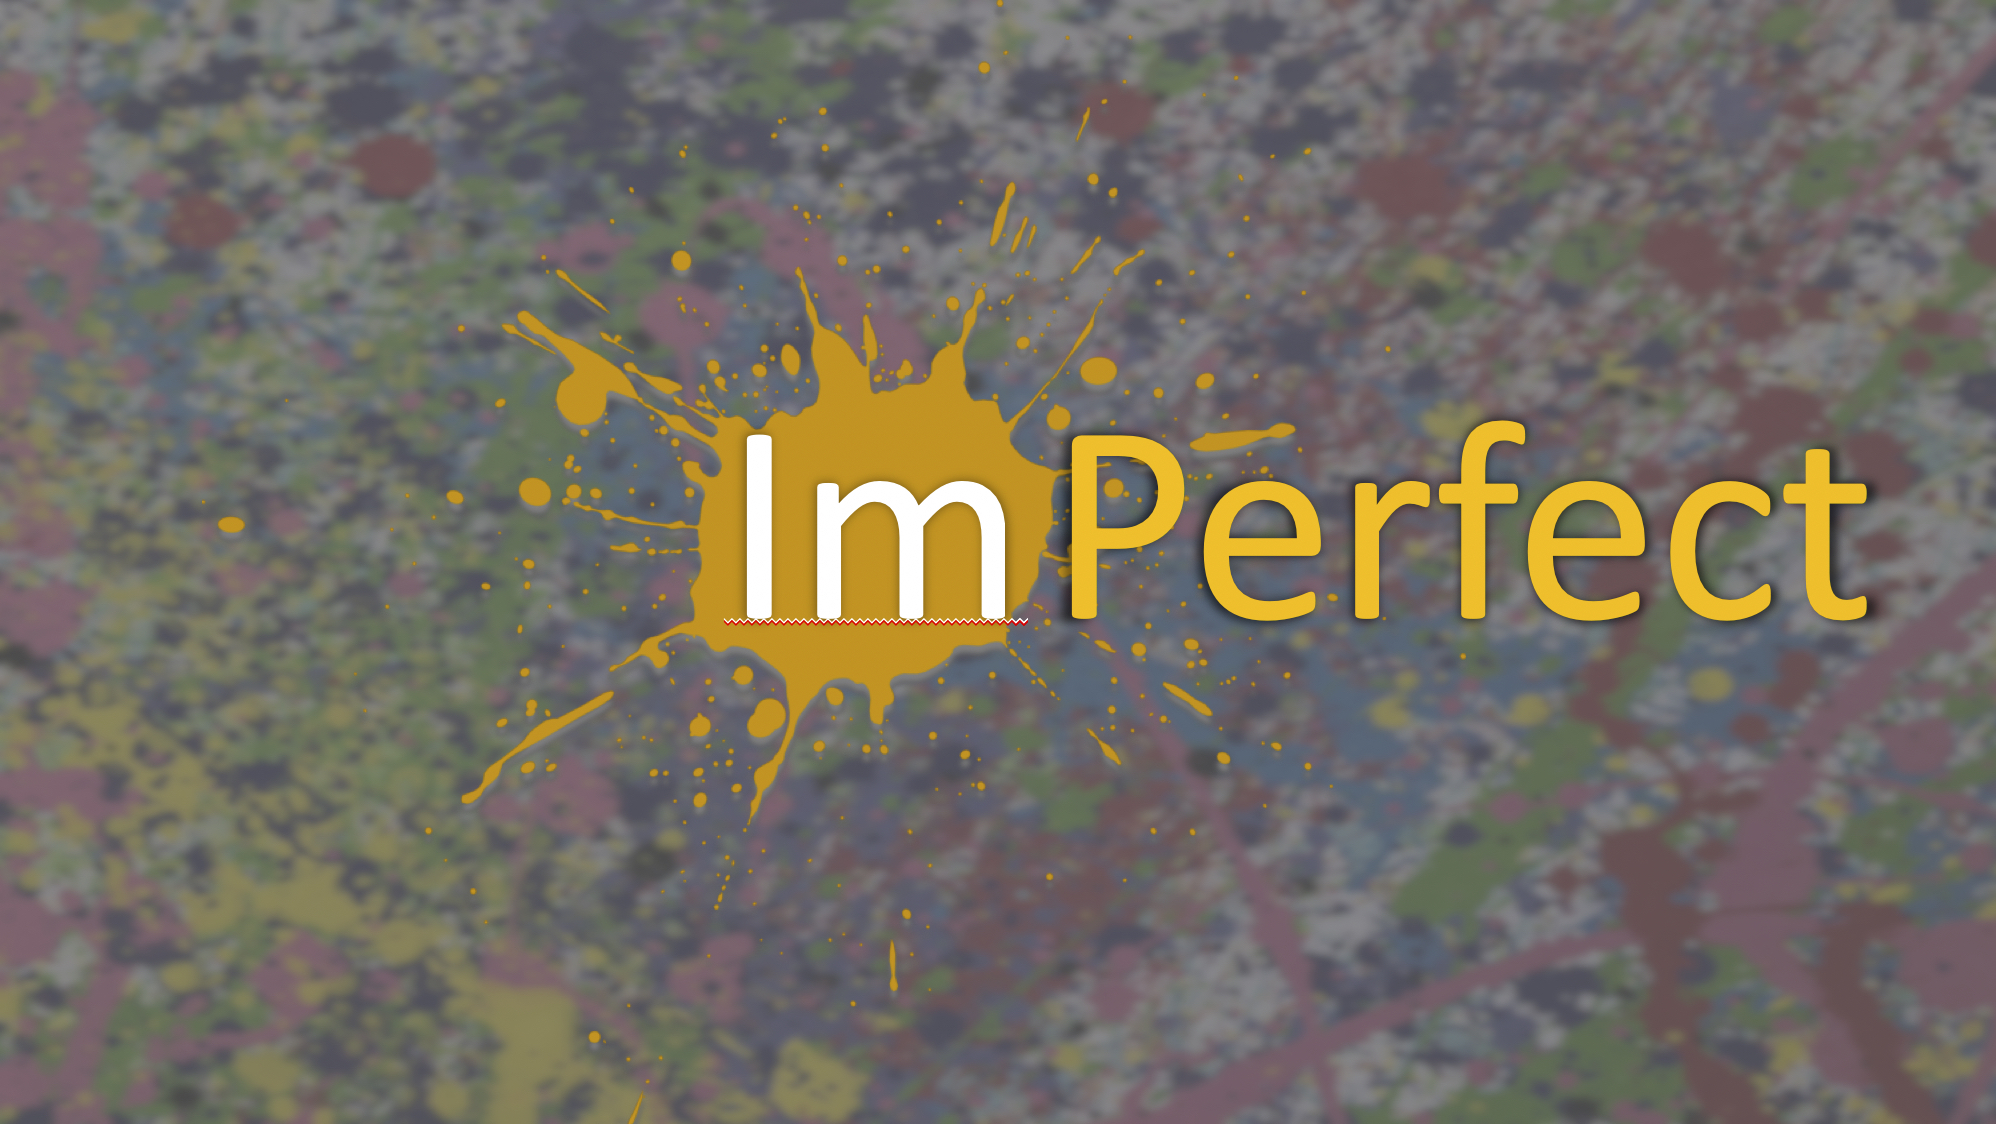 ImPerfect message series logo